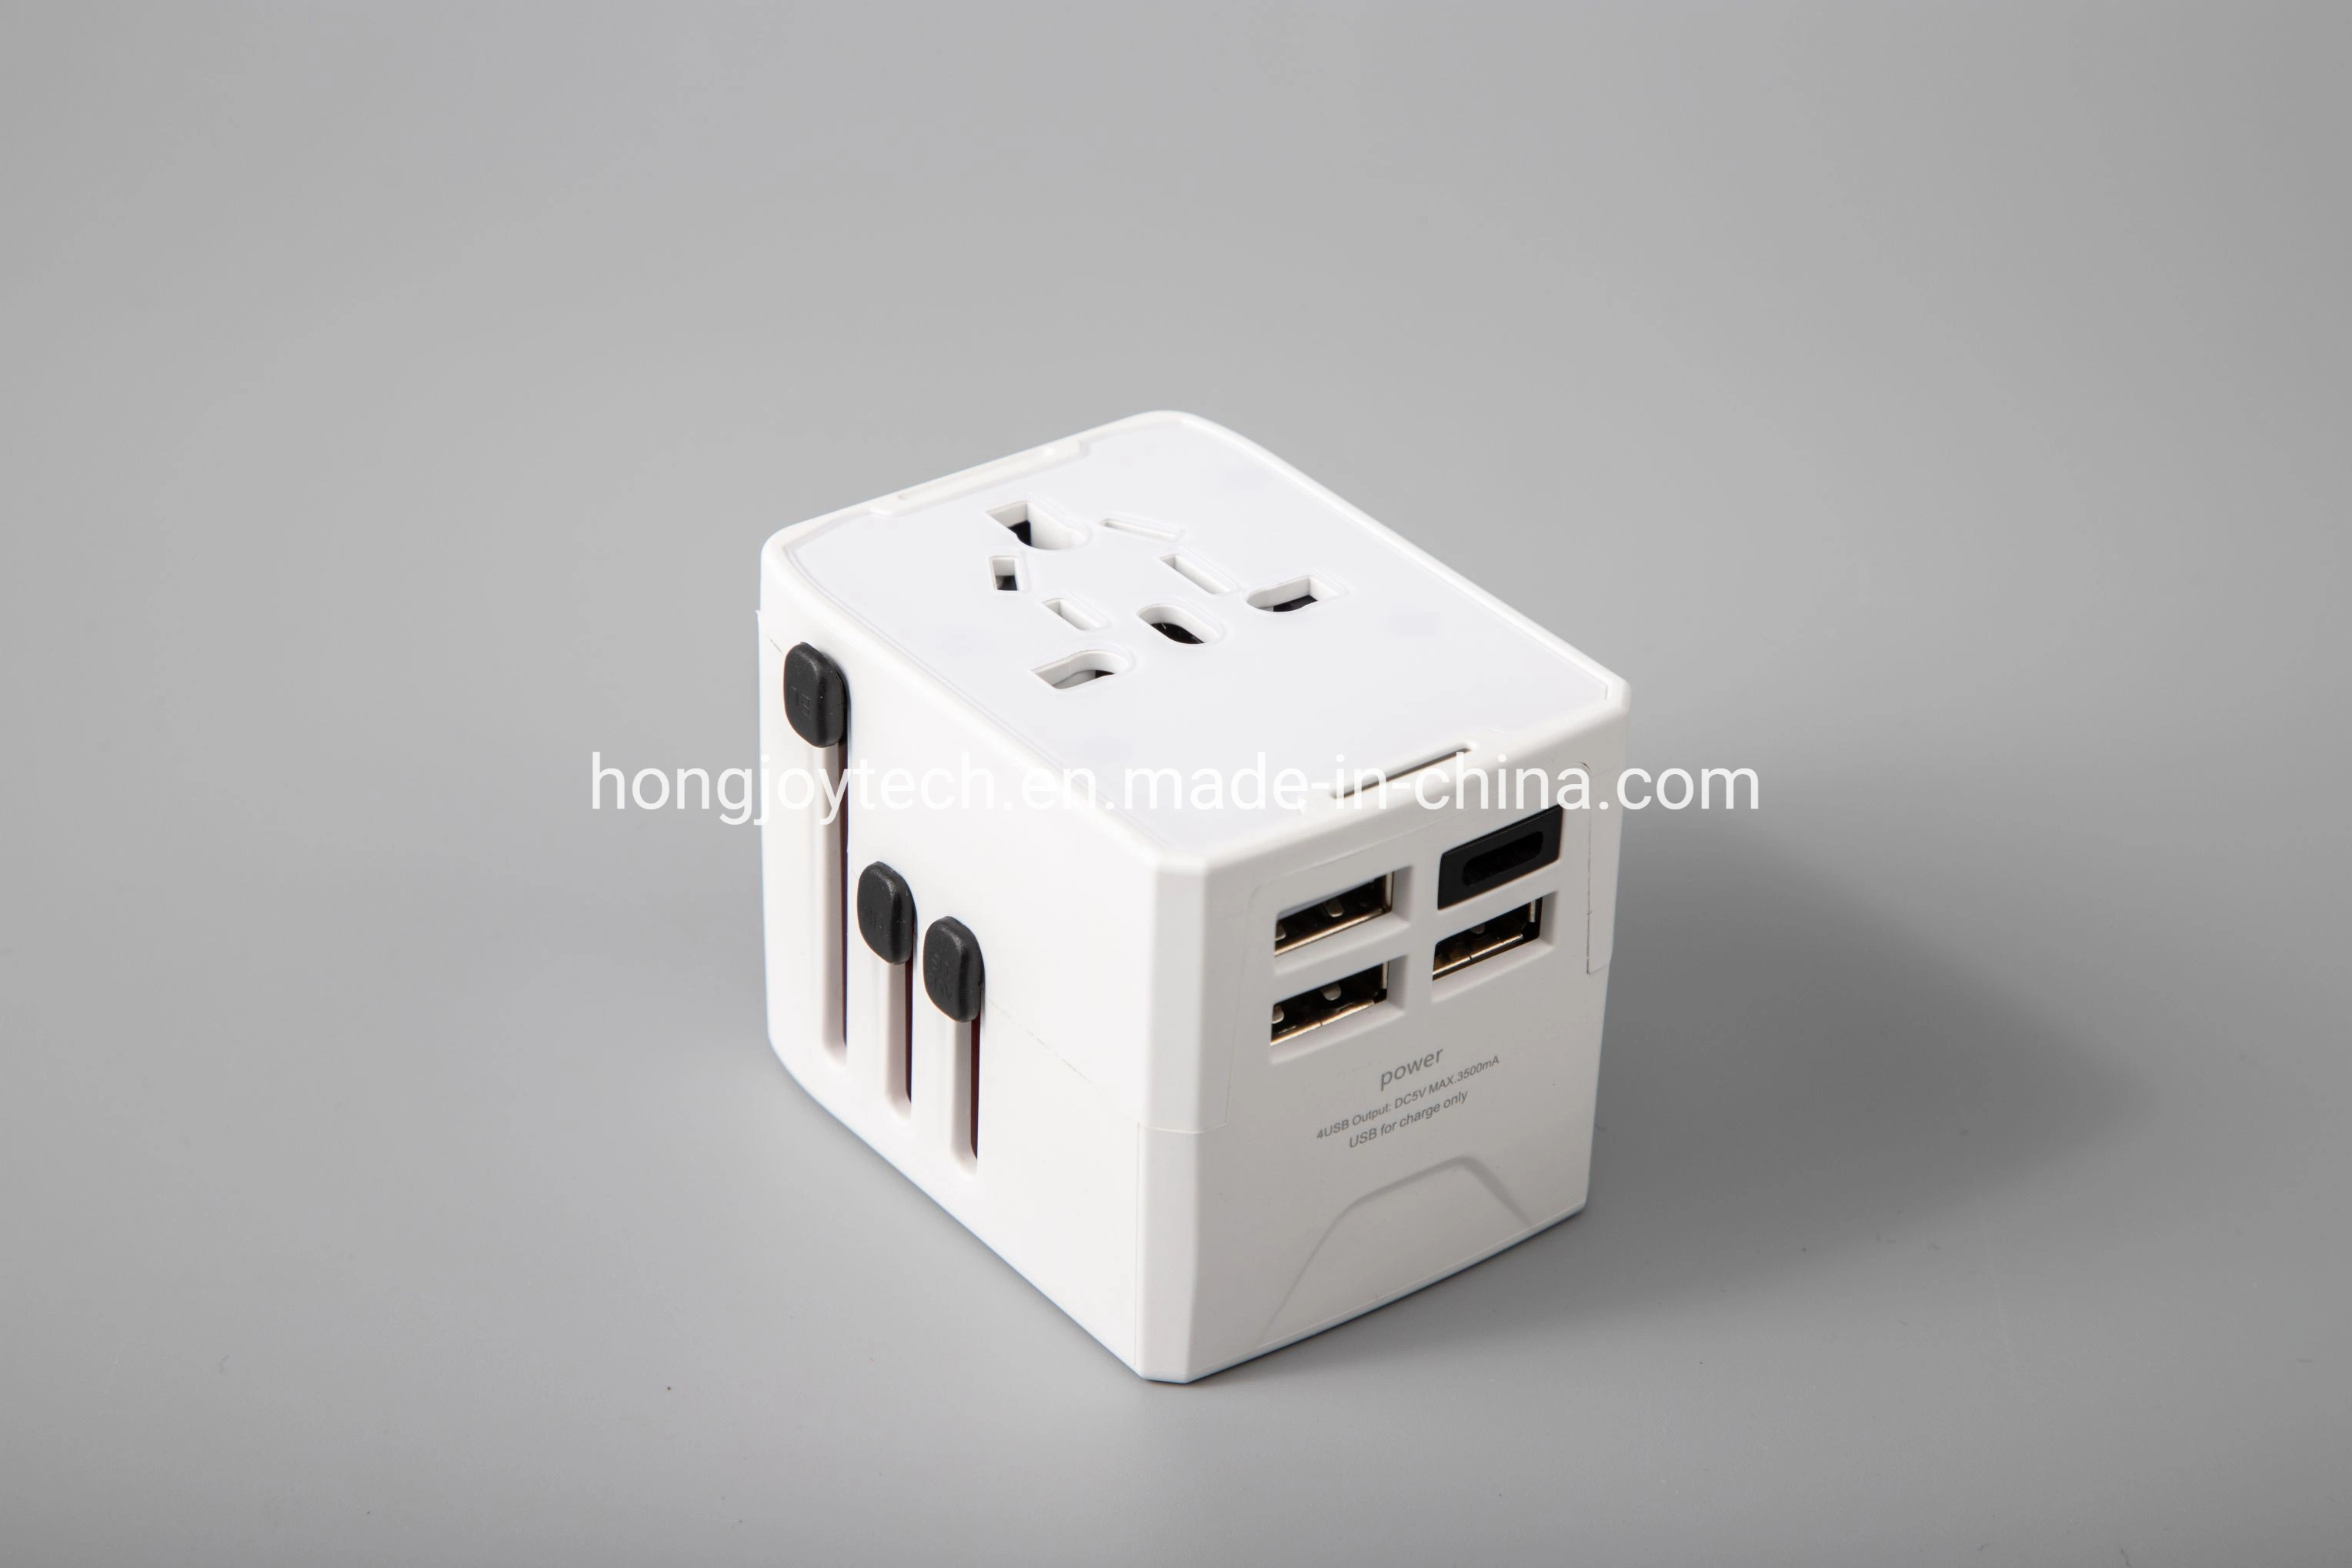 Customized Logo 5V 3.5A All in One Universal Fast Travel Charger Kit European British U.S.a. Australia Smart Power Plug USB Portable Quick Mobile Phone Charger